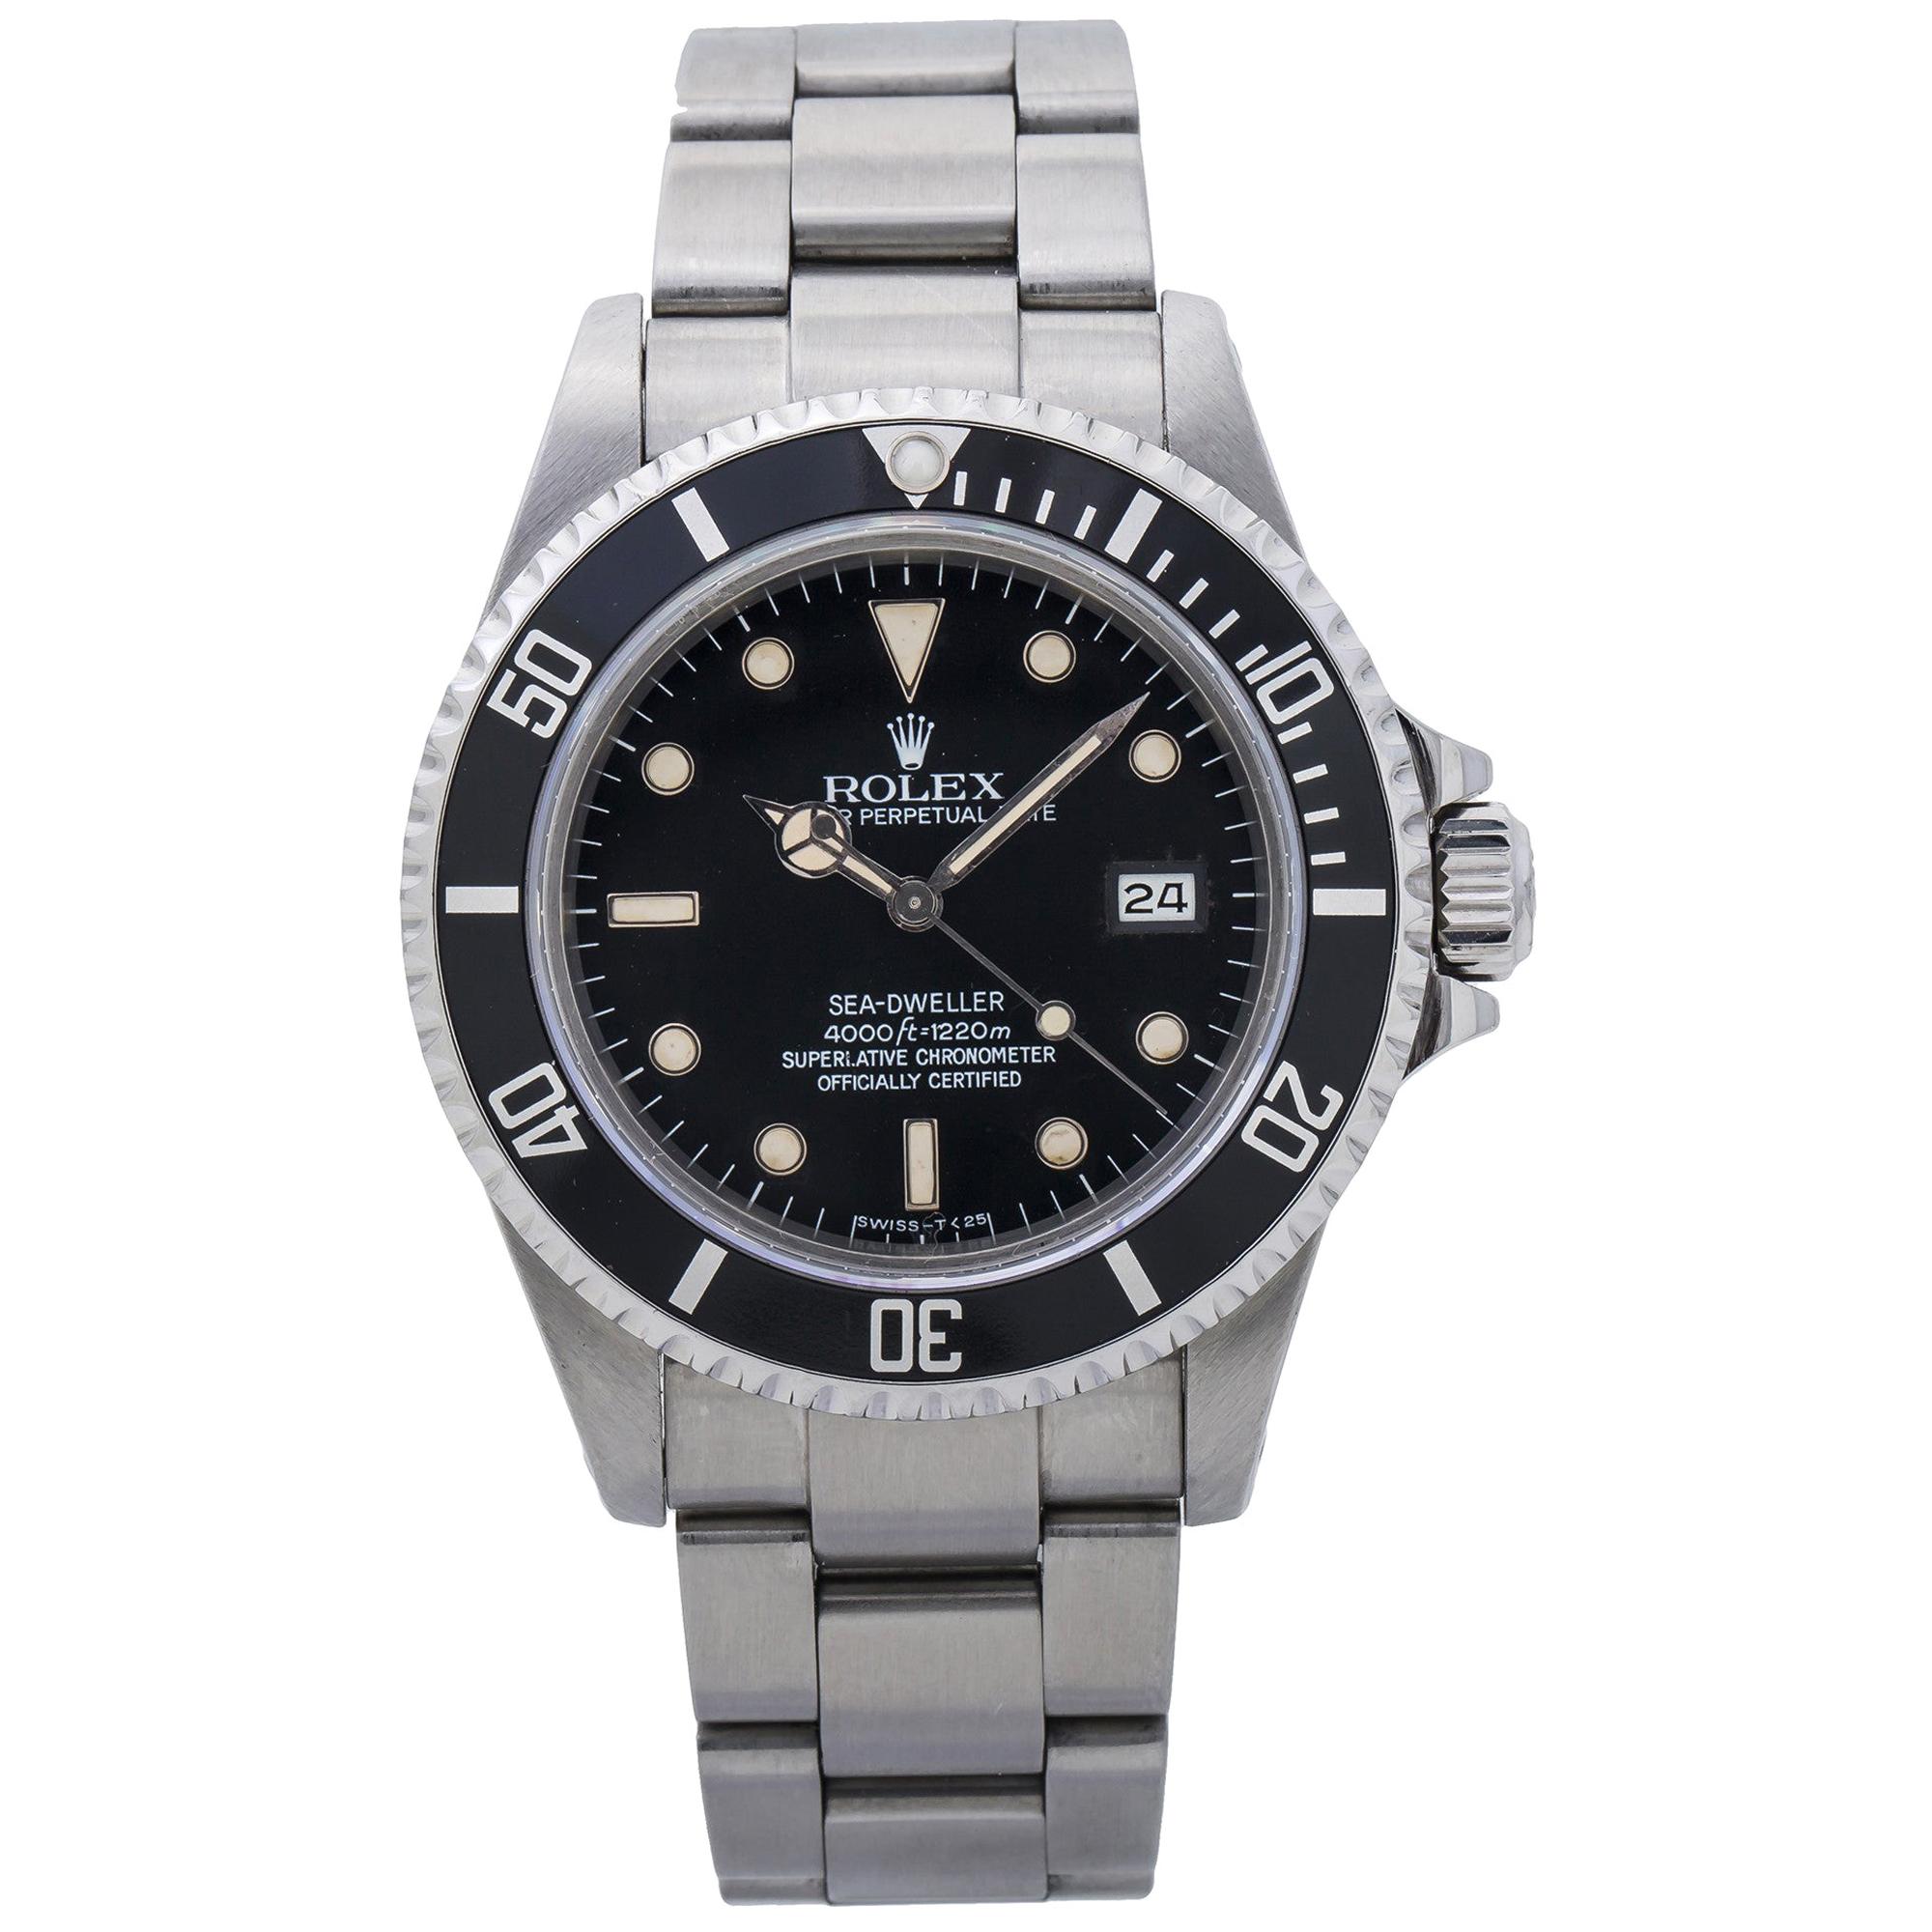 Rolex Sea-Dweller 16660, Black Dial, Certified and Warranty For Sale